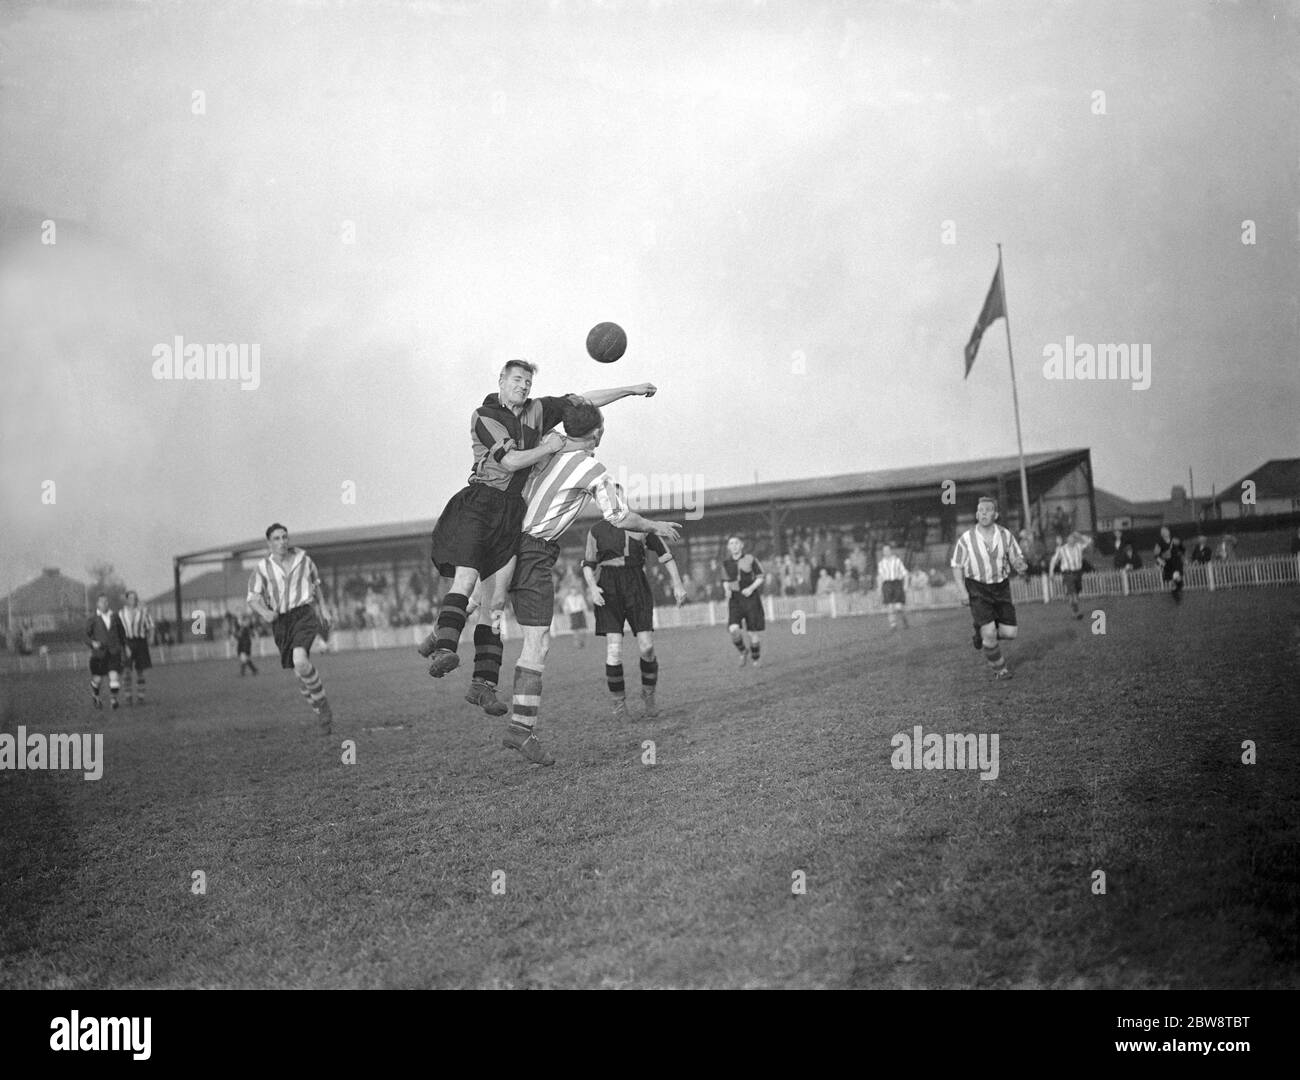 Dartford reserves vs. Sittingbourne - Kent League - 29/10/38 . Two players compete for the ball . 1936 Stock Photo